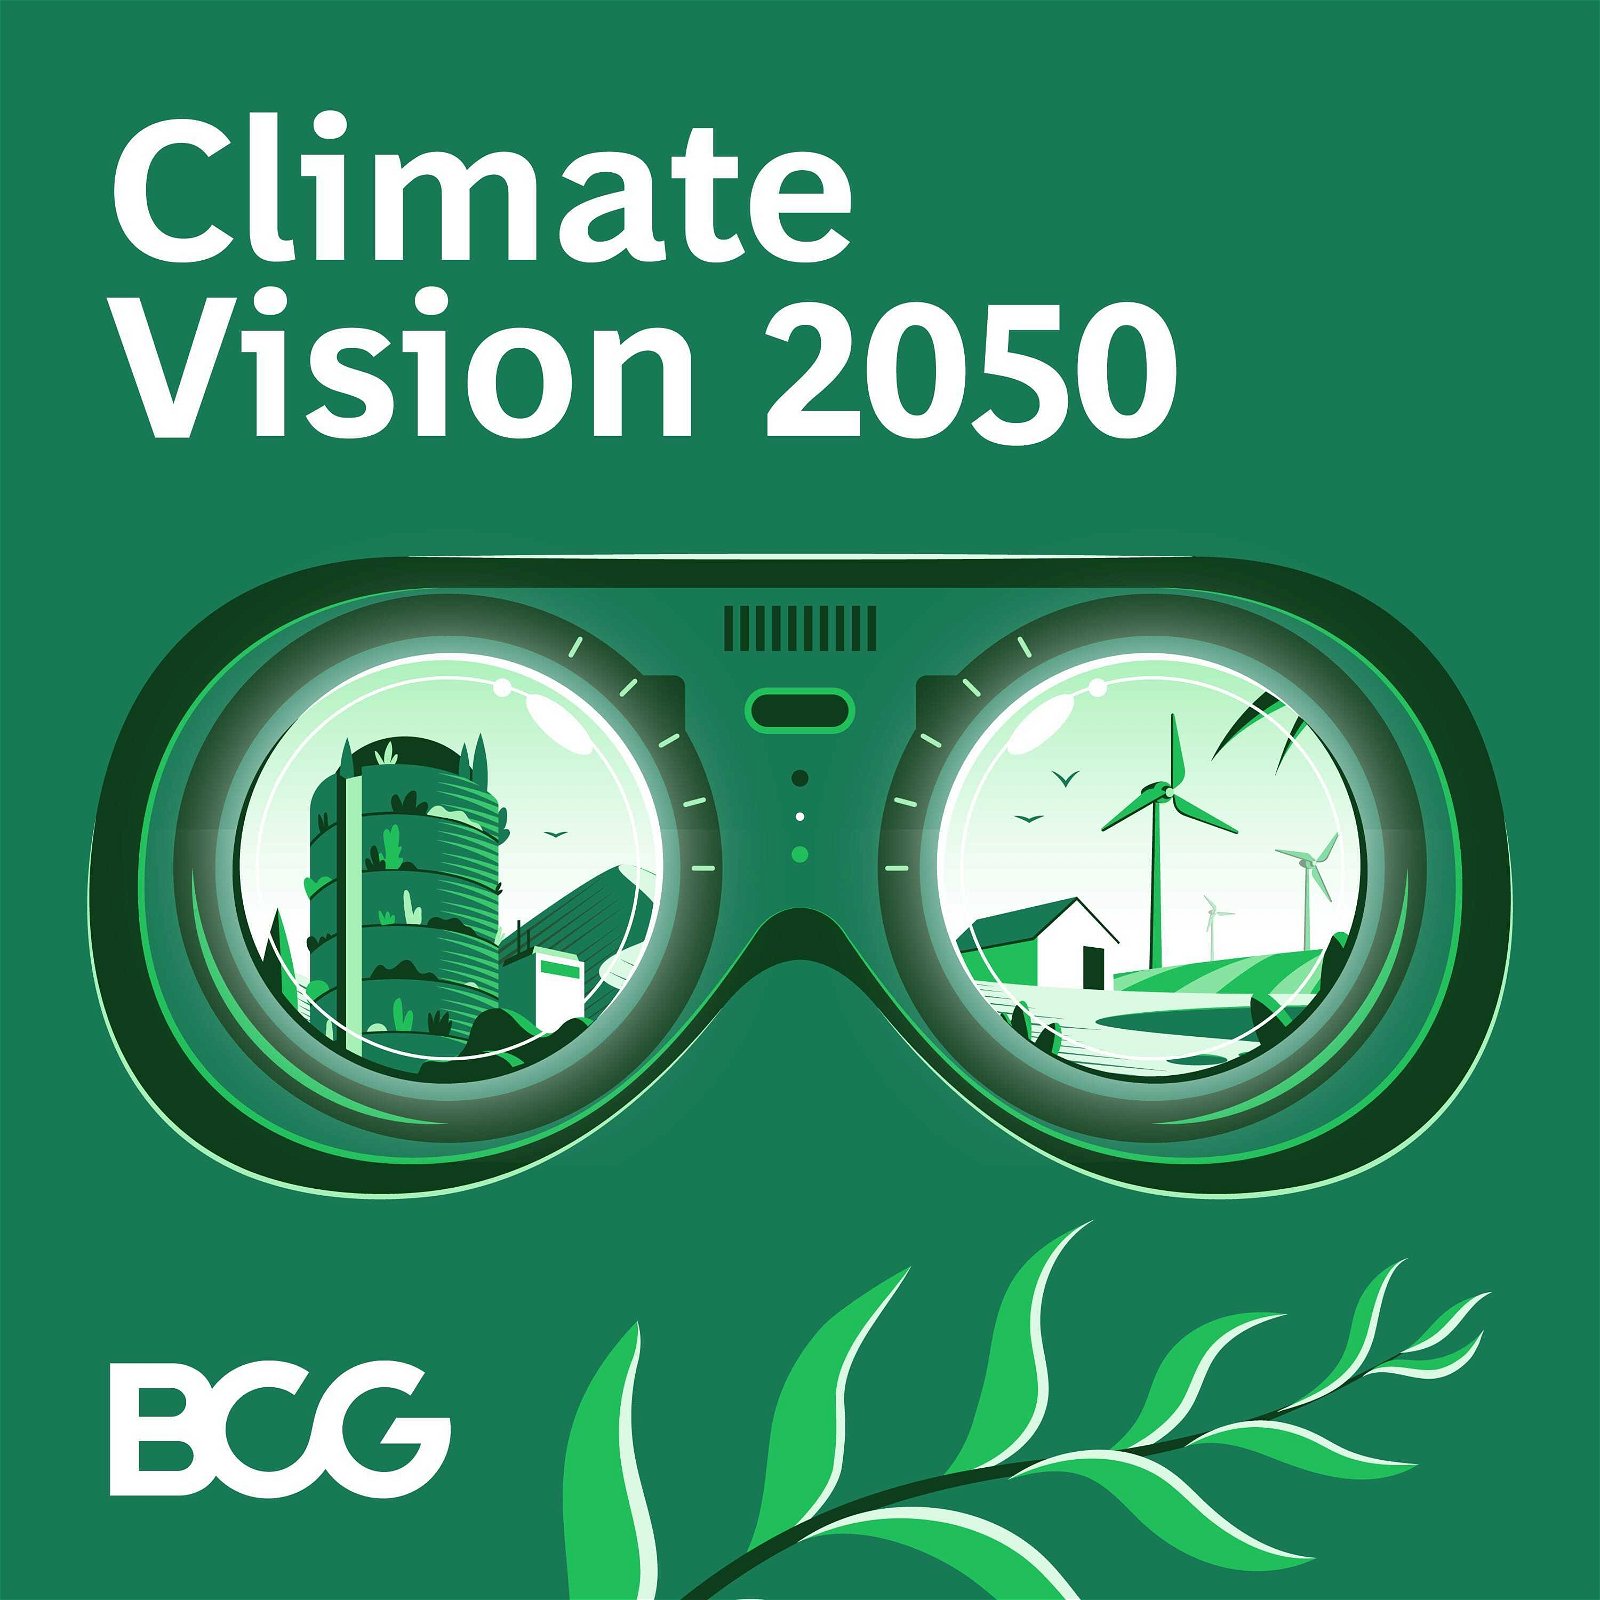 BCG presents: Climate Vision 2050--The Green City in the Sun